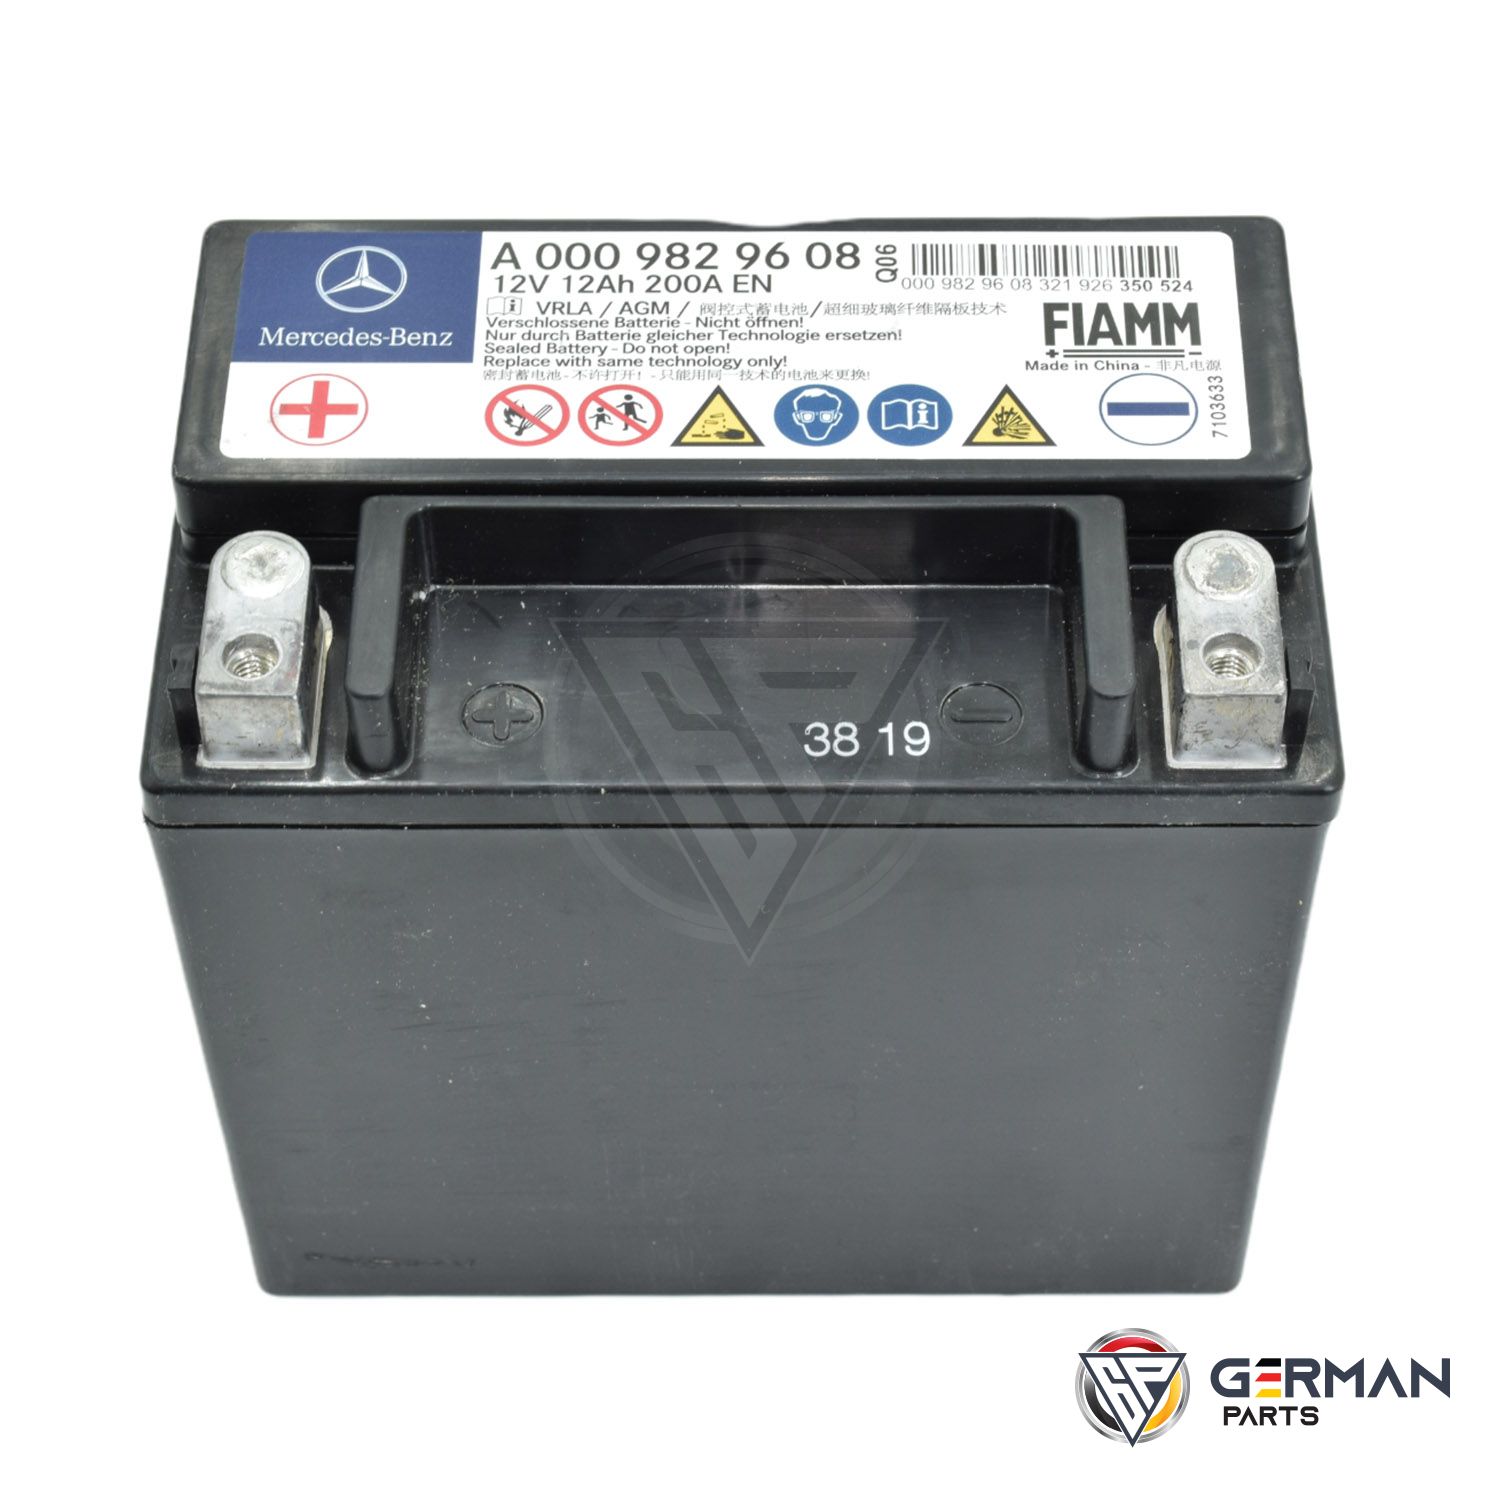 Buy Genuine Mercedes Benz Auxiliary Battery 12 V 12 Ah 0009829608 German Parts